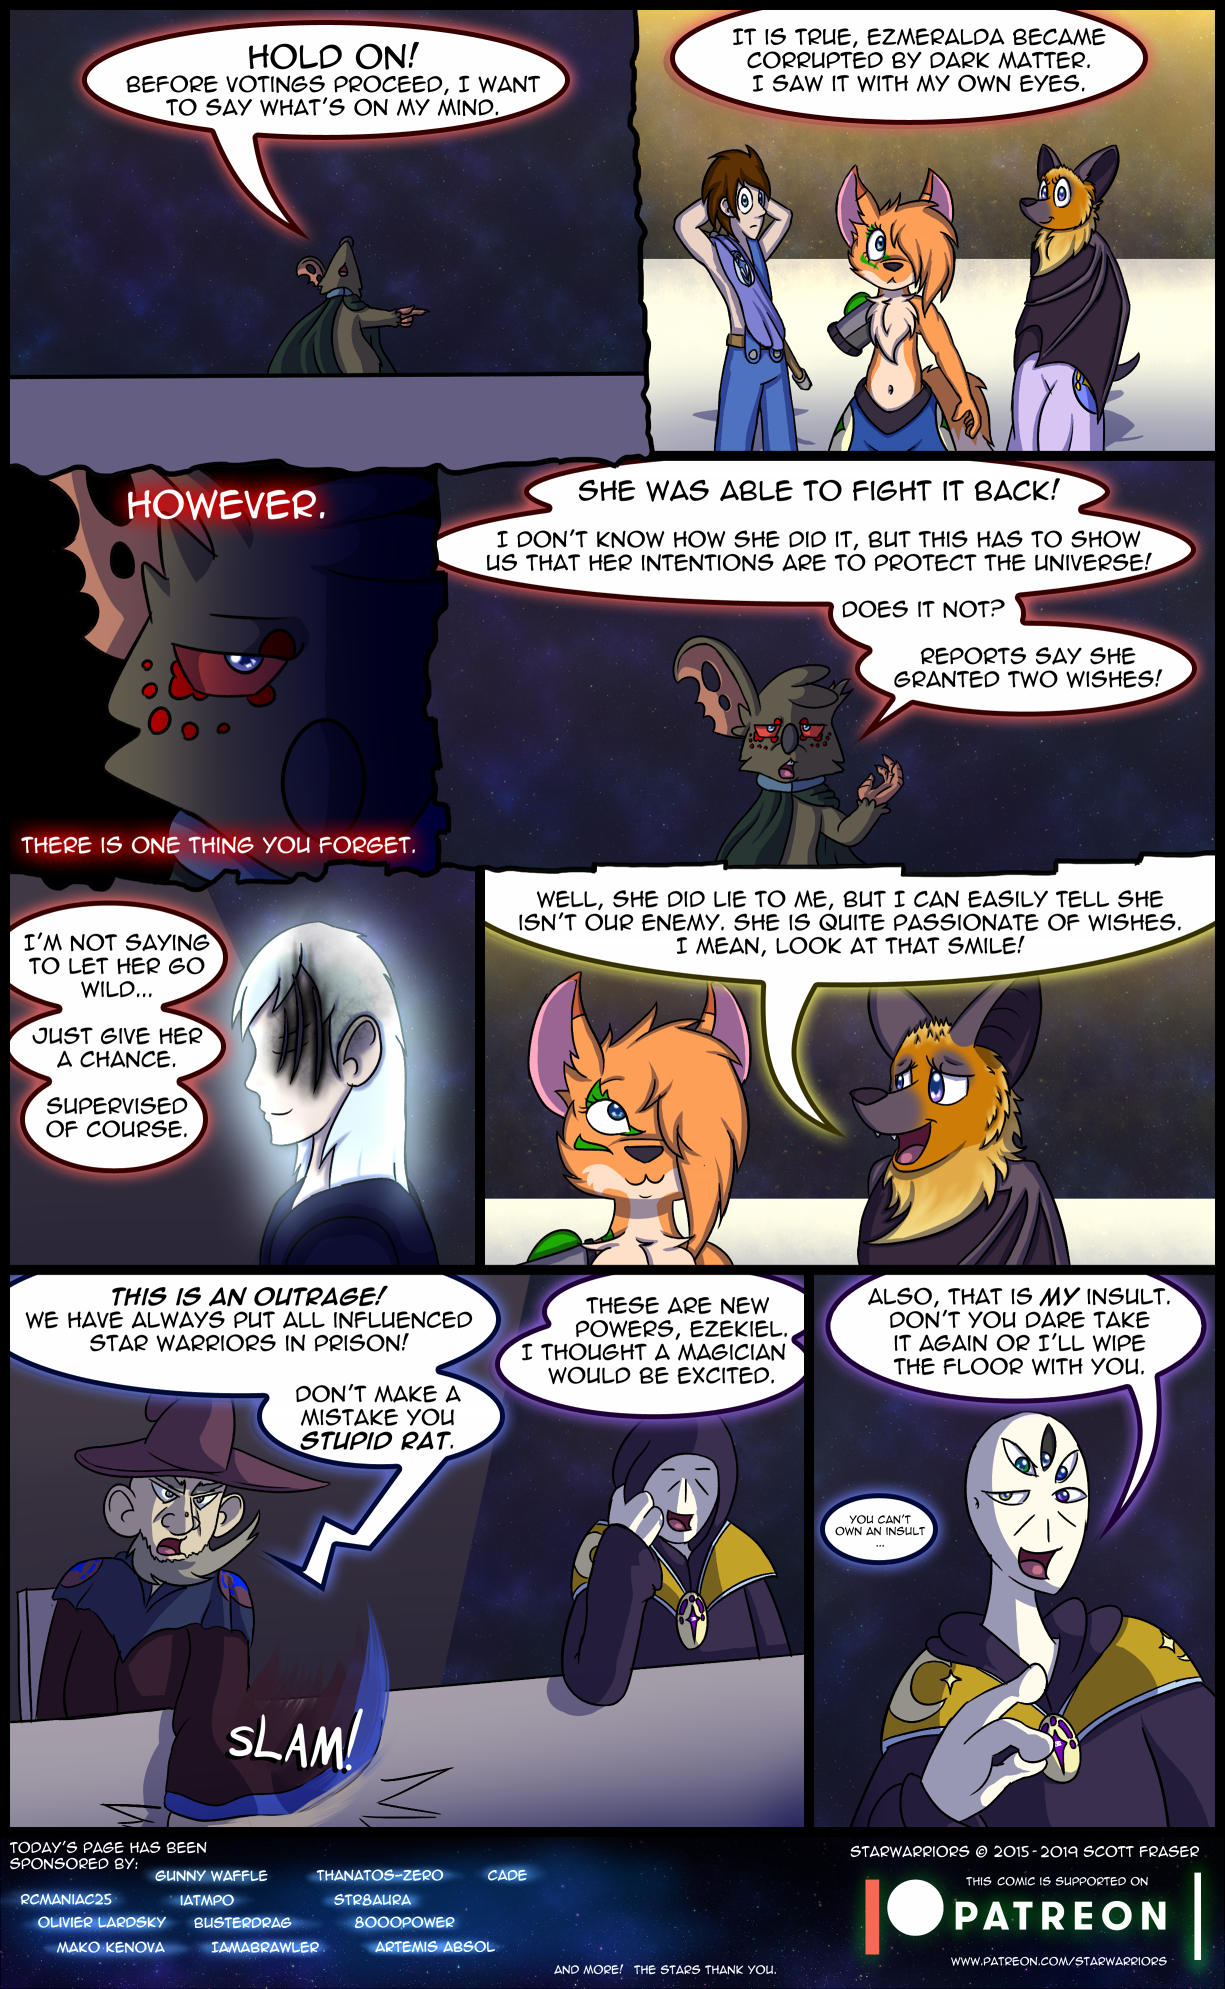 Ch4 Page 13 – A Chance